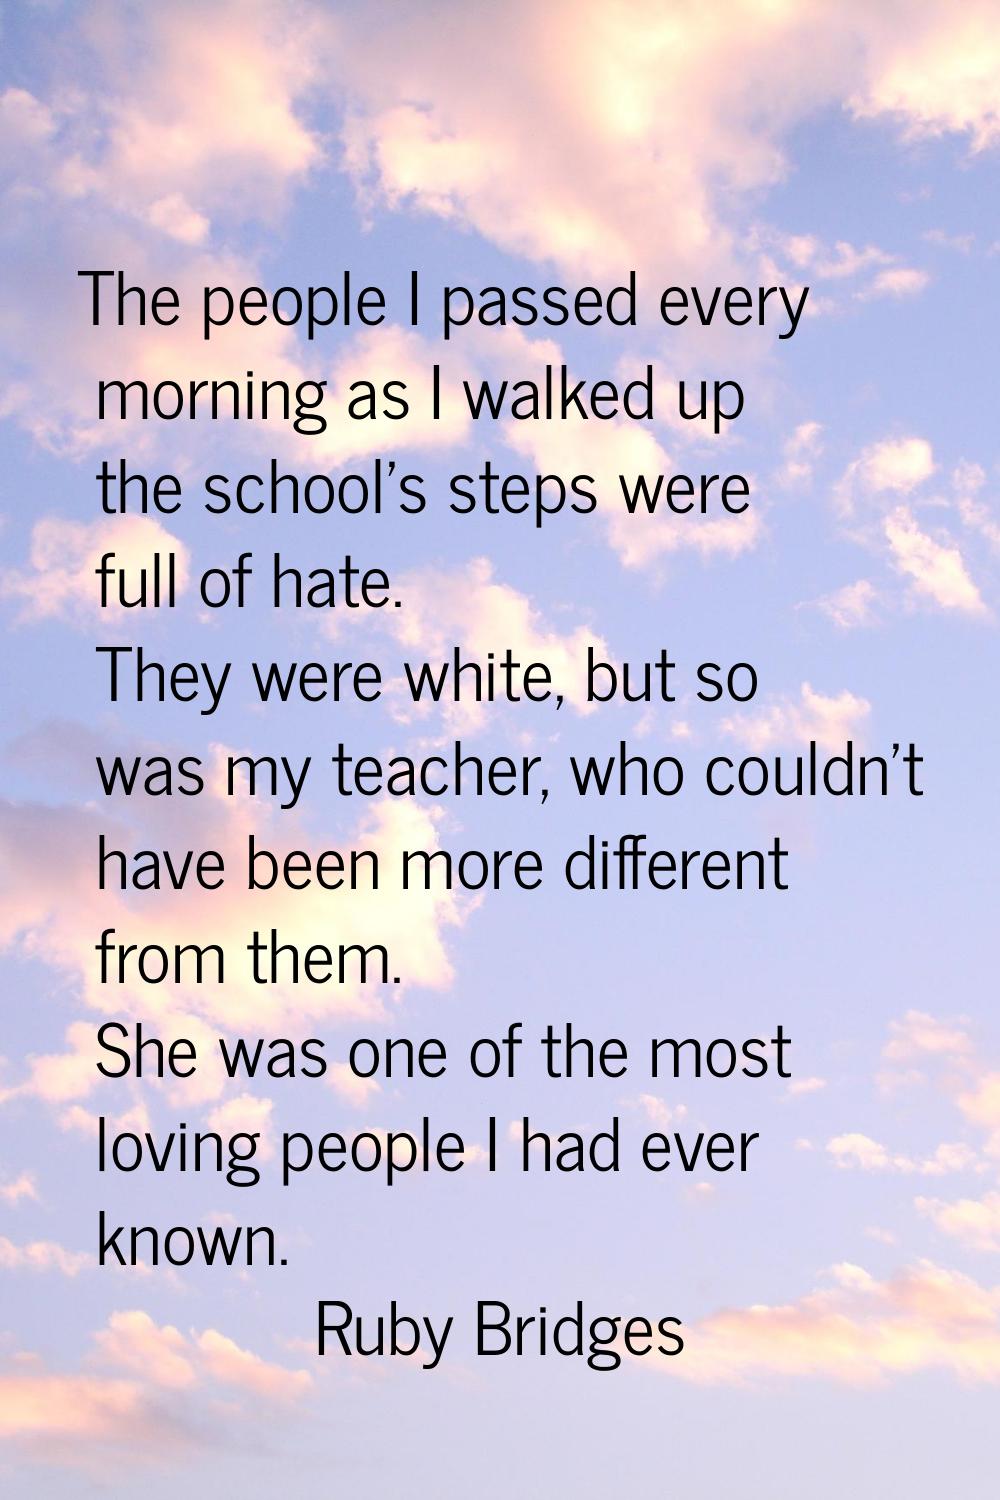 The people I passed every morning as I walked up the school's steps were full of hate. They were wh